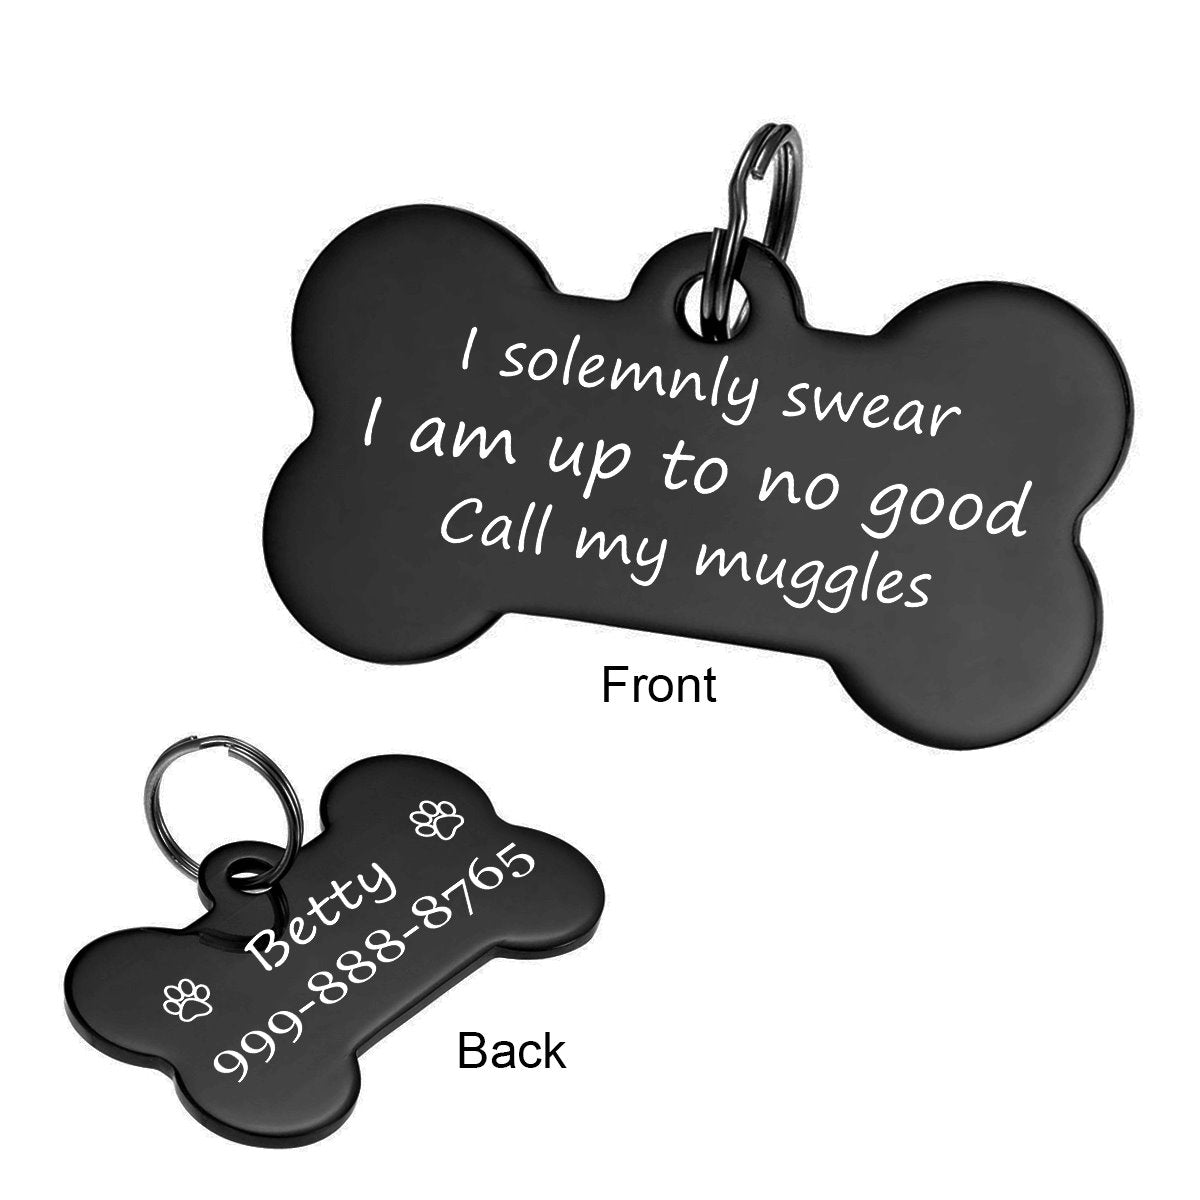 Call My Muggles Personalized Pet ID Tag Pet Tag GrindStyle Black L:50mmx28mm 